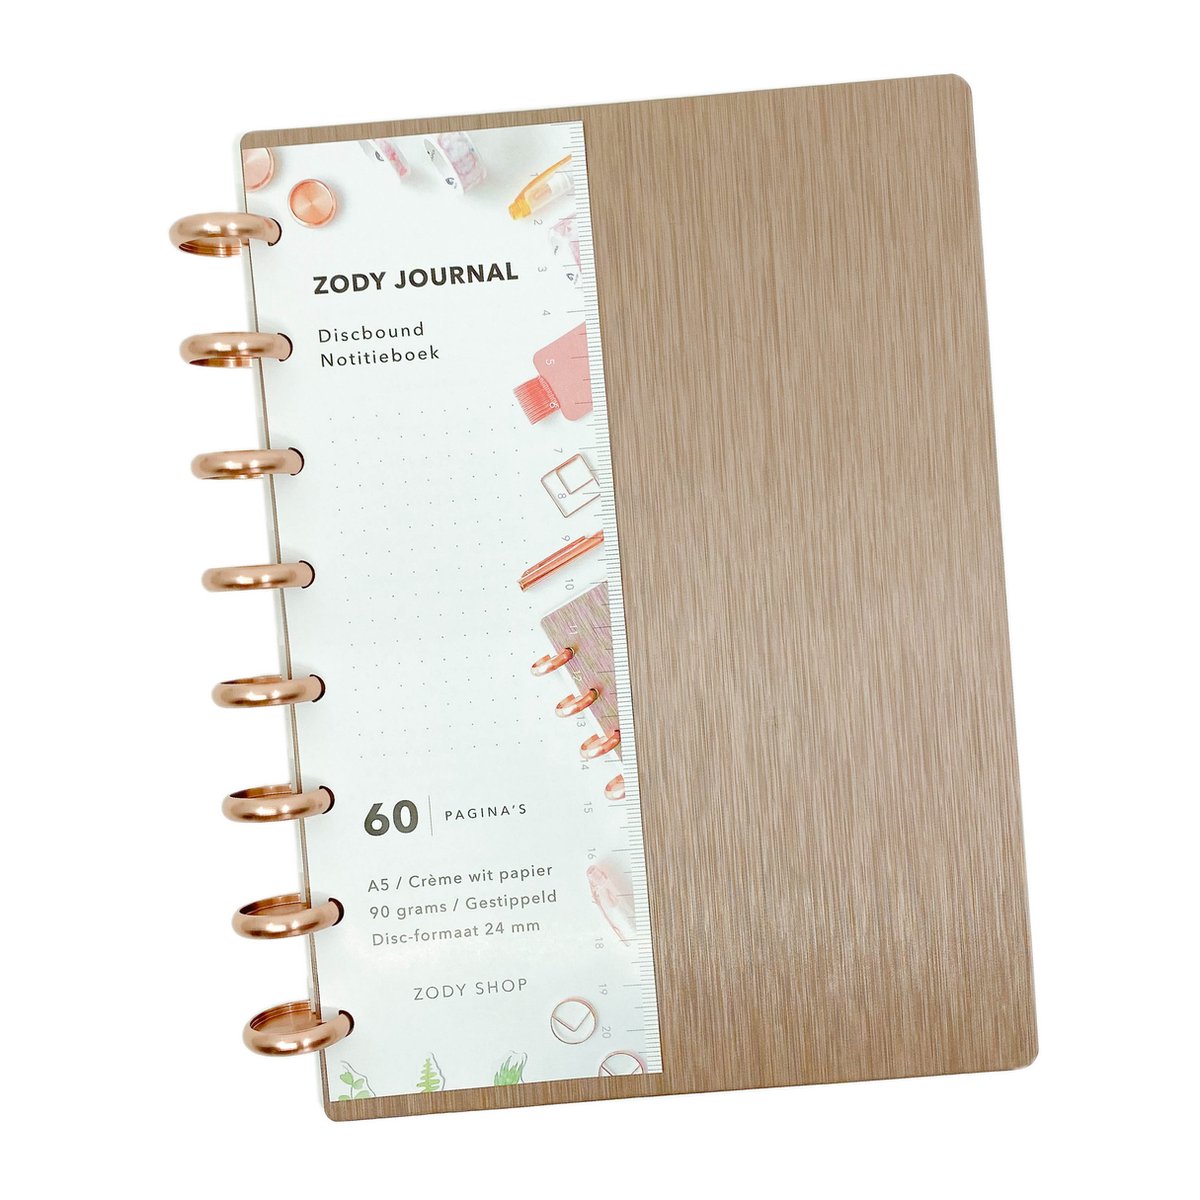 ZODY SHOP - Zody Journal Notitieboek DeLuxe - Champagne - Bullet Journal A5 - Hardcover Discbound Notebook - 90 grams crème papier